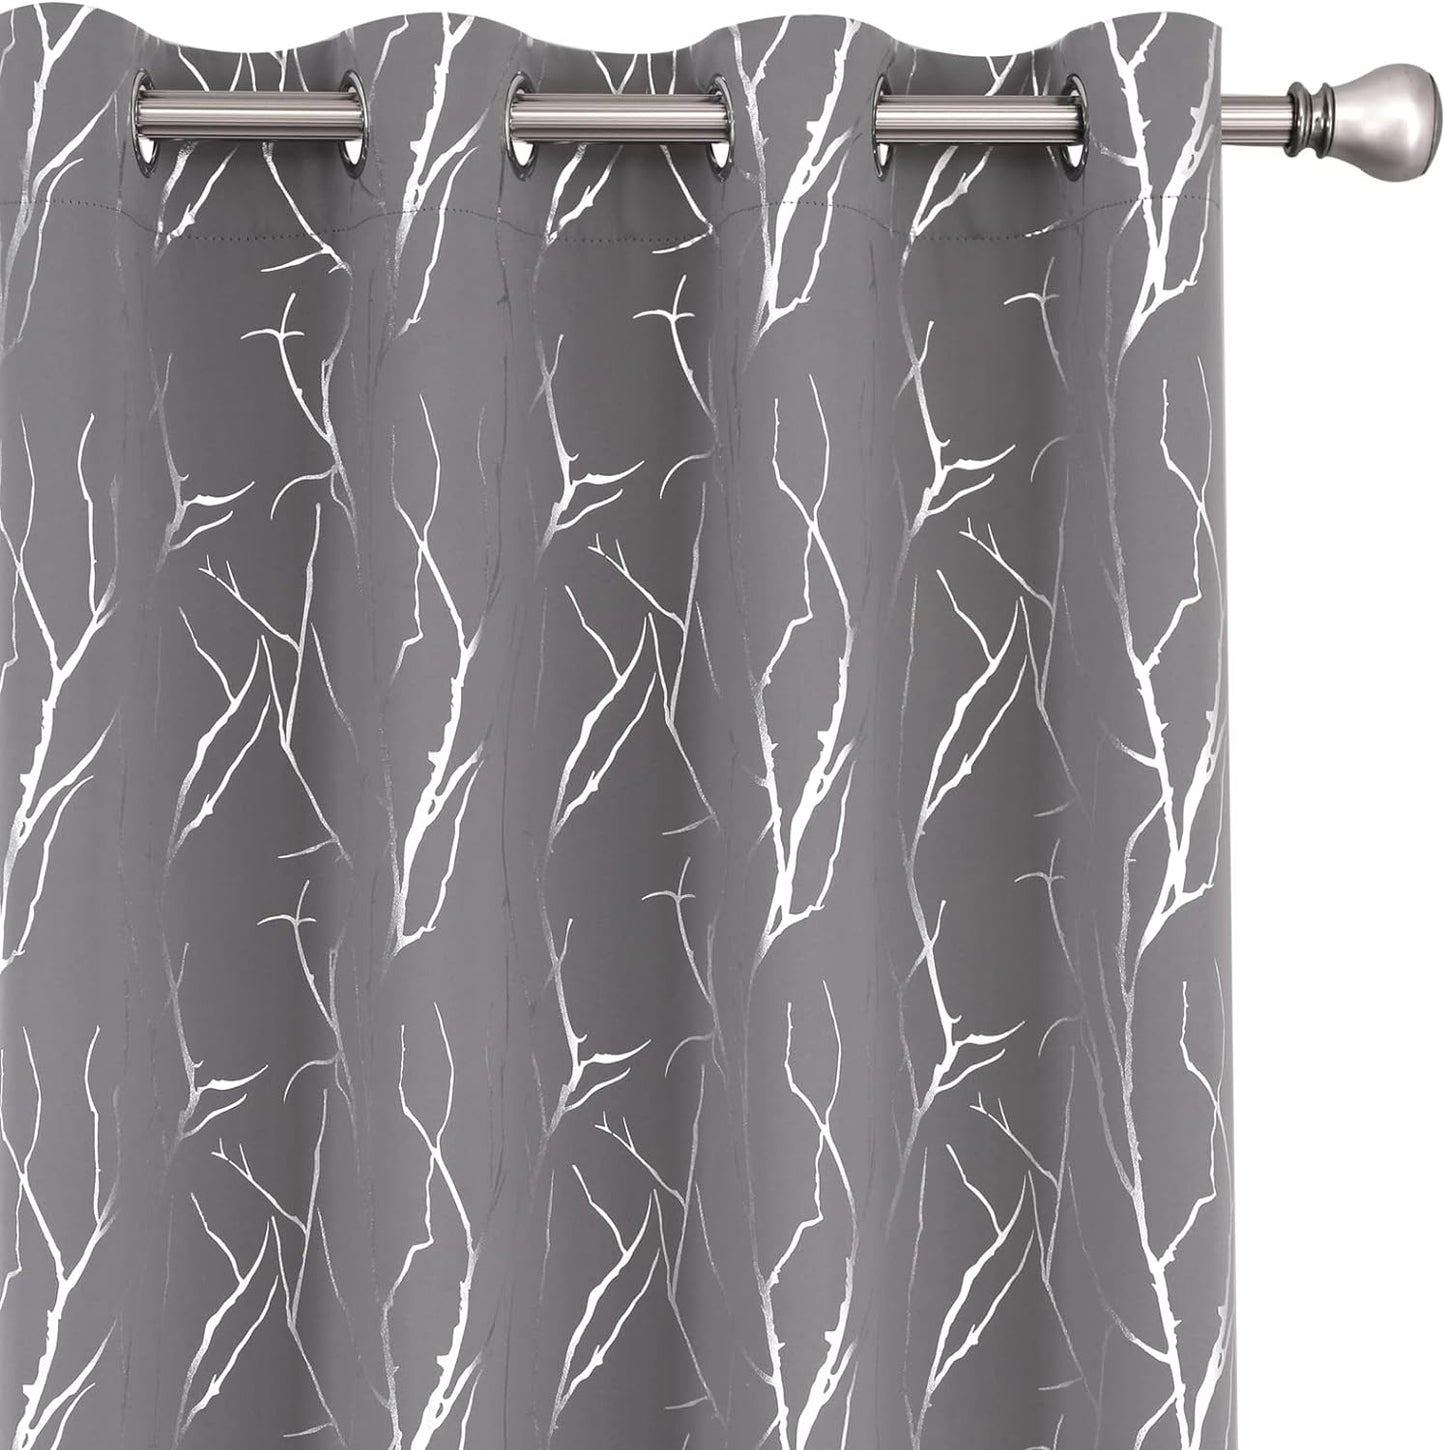 SMILE WEAVER Black Blackout Curtains for Bedroom 72 Inch Long 2 Panels,Room Darkening Curtain with Gold Print Design Noise Reducing Thermal Insulated Window Treatment Drapes for Living Room  SMILE WEAVER Tree Branch-Light Grey 52Wx63L 